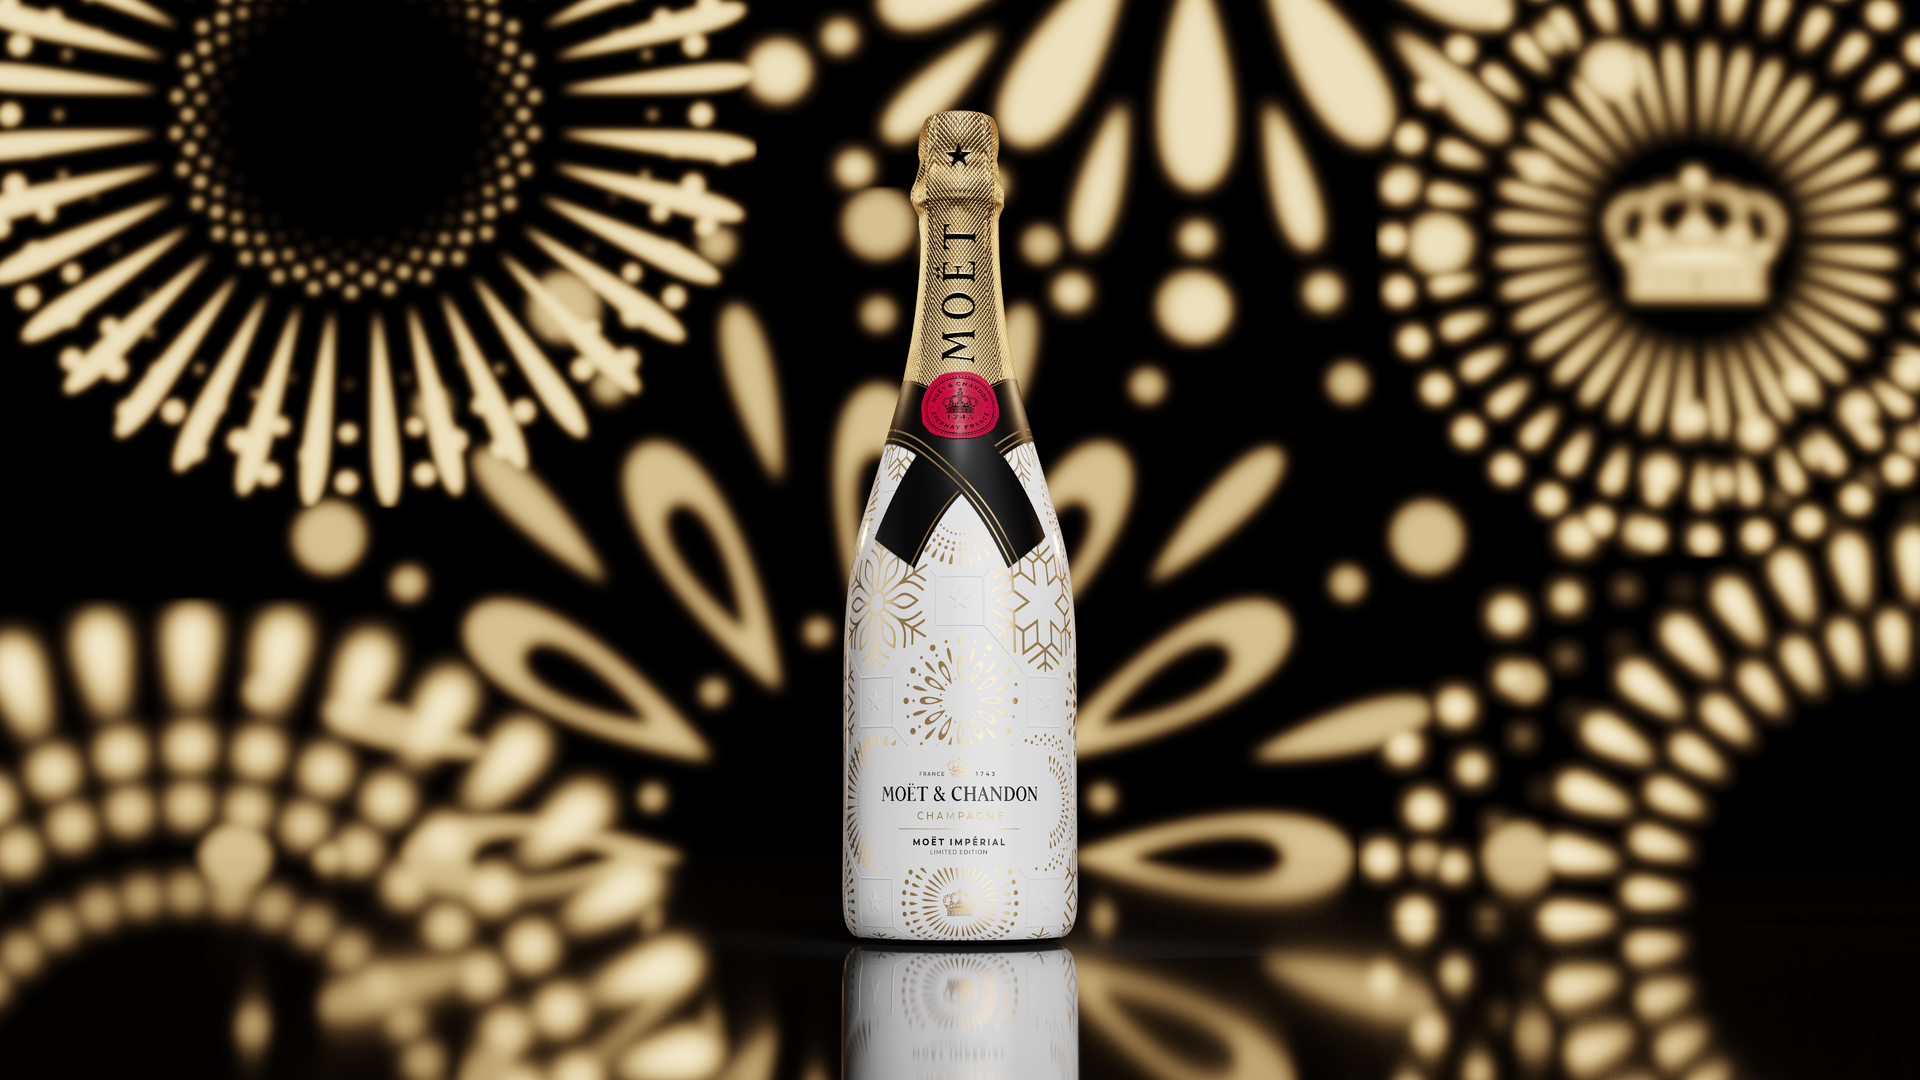 Buy Moet & Chandon champagne and make your evenings exciting. Now